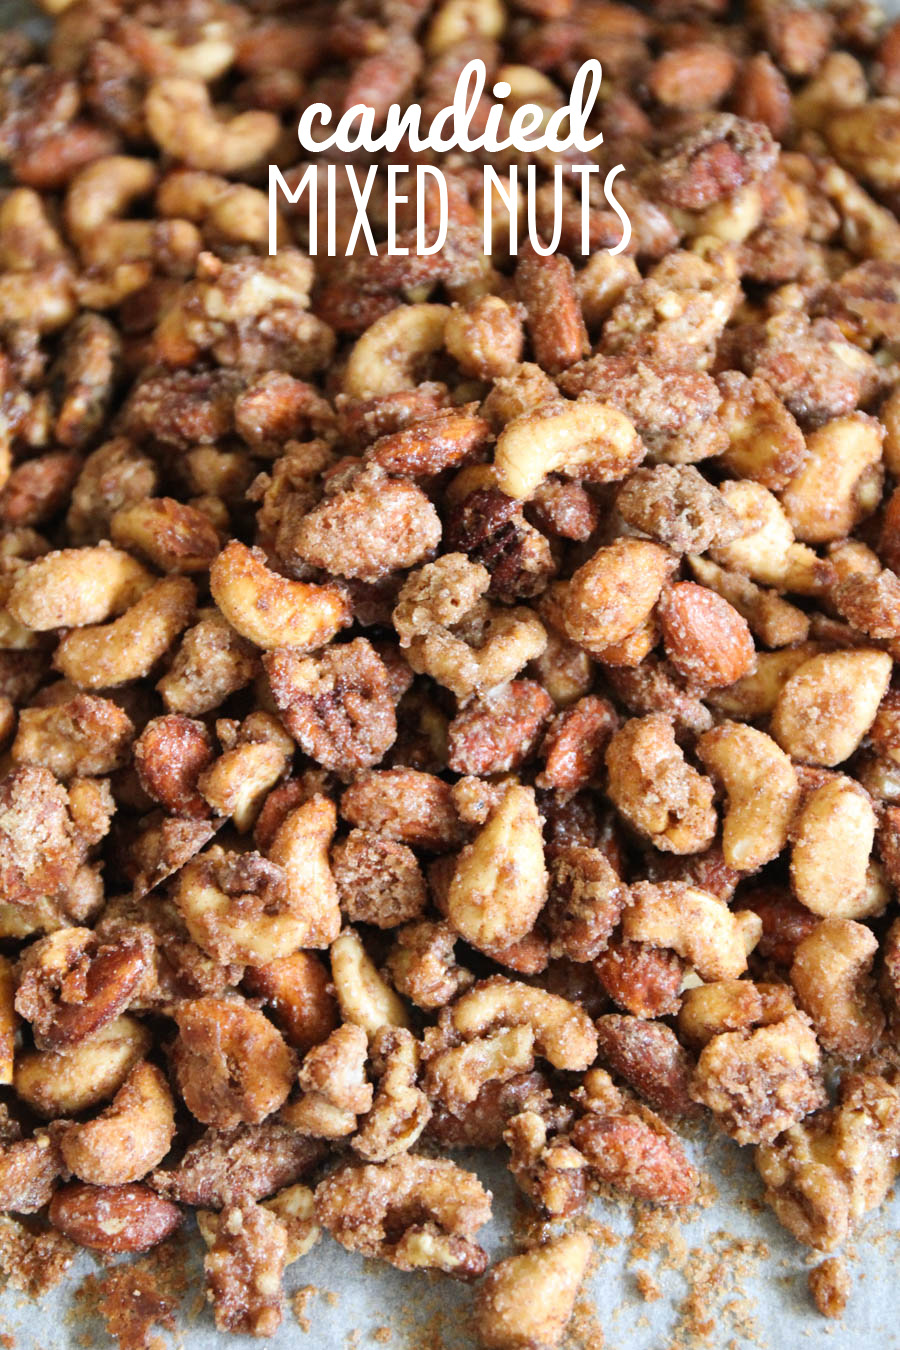 These candied nuts are so addicting and delicious, and incredibly easy to make!